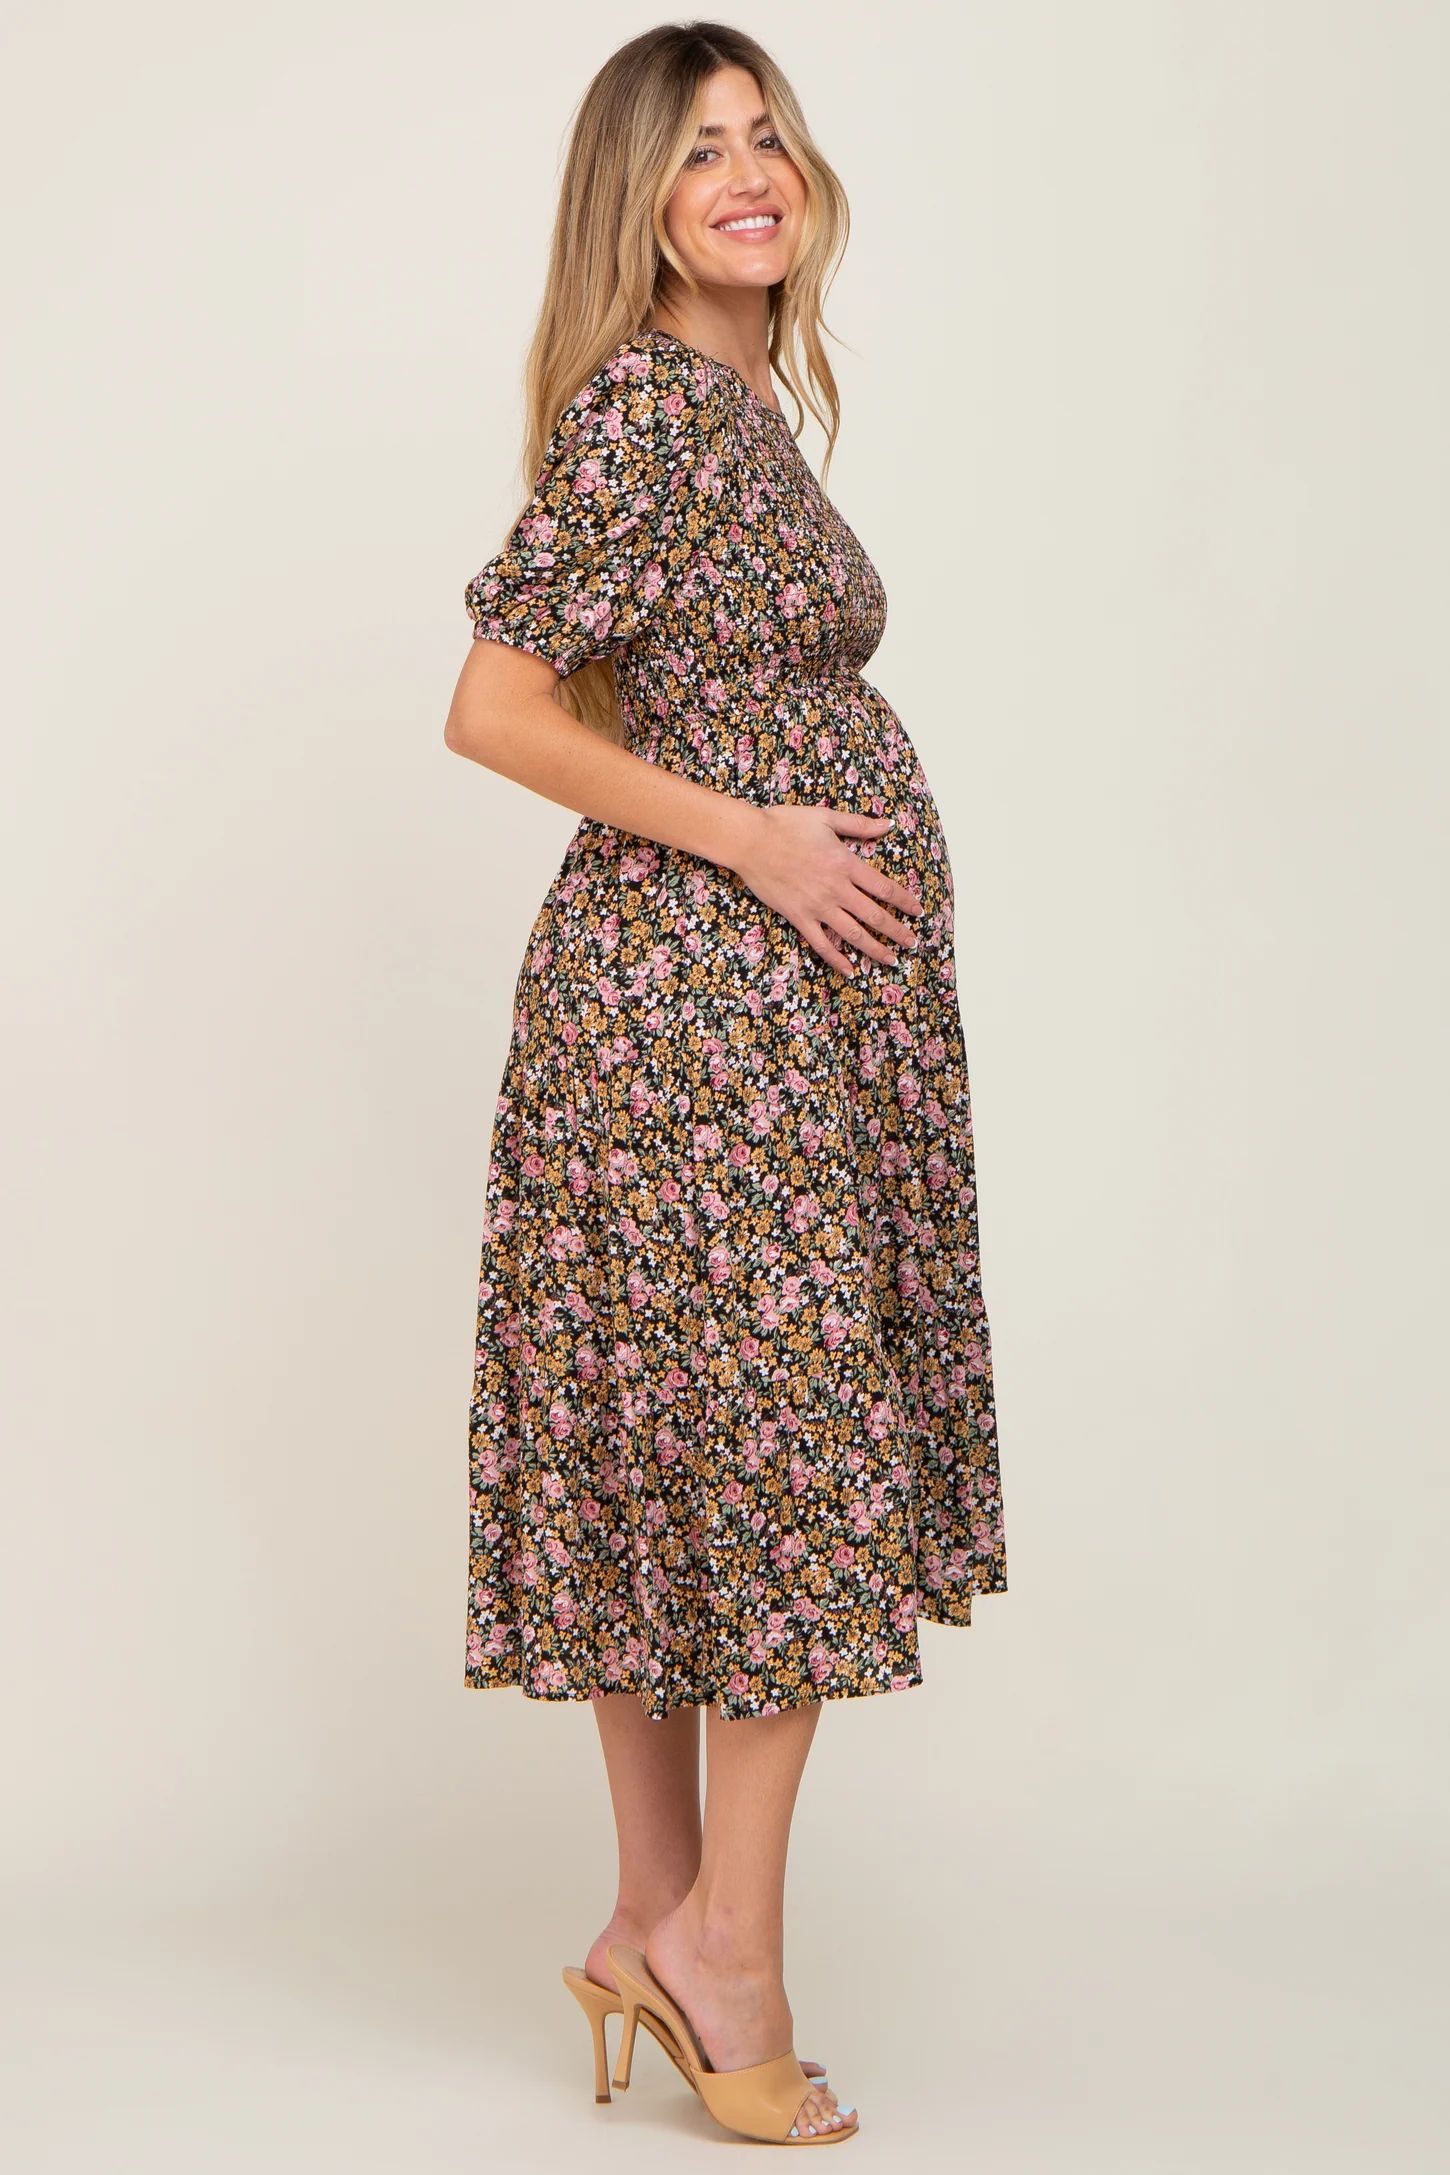 Multi-Color Floral Smocked Tiered Maternity Midi Dress | PinkBlush Maternity